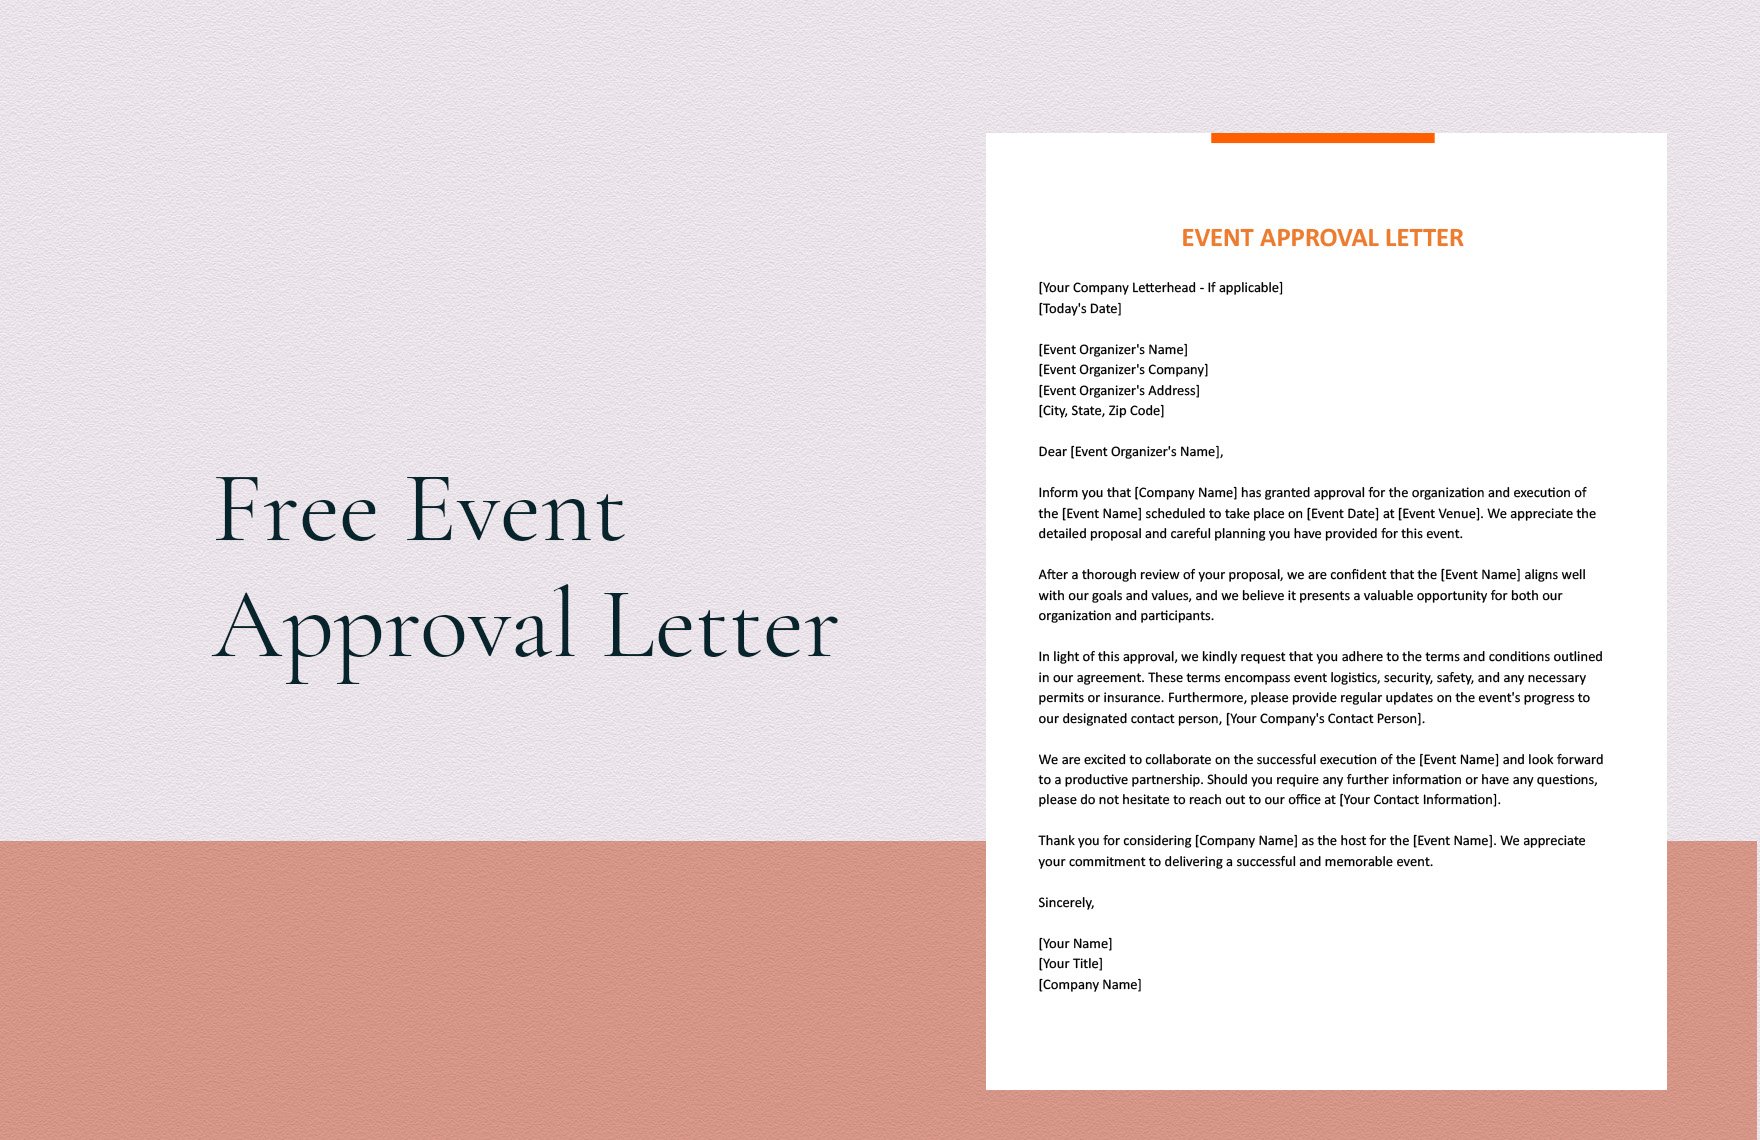 Event Approval Letter in Word, Google Docs